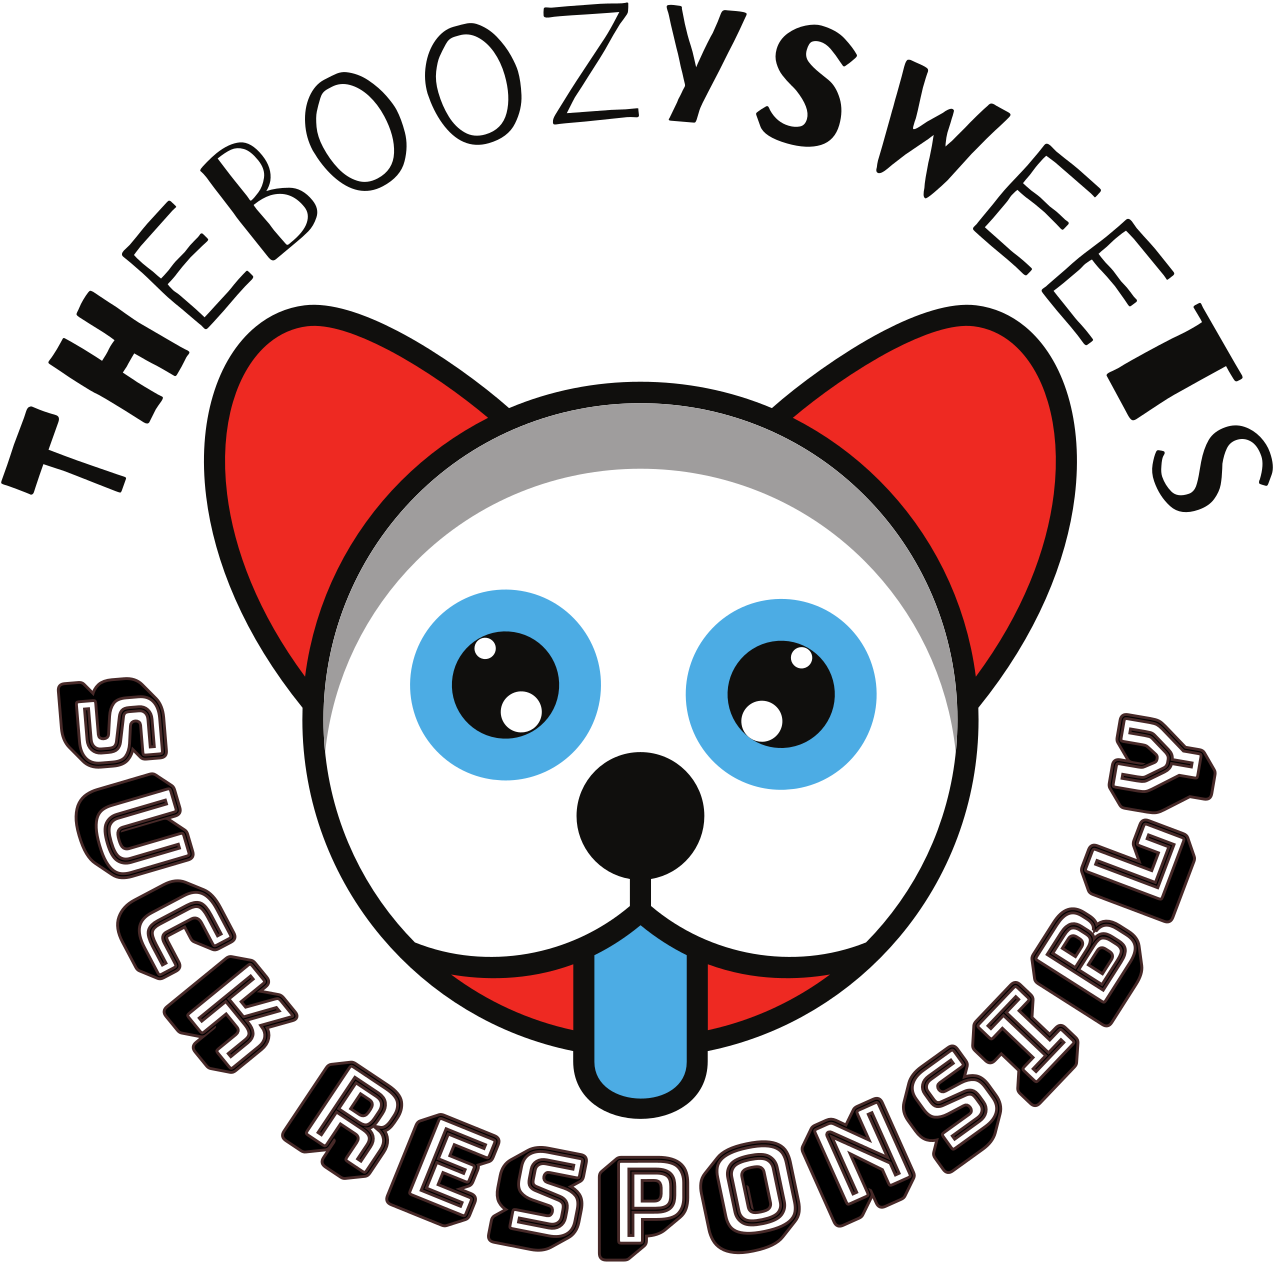 TheBoozySweets's web page